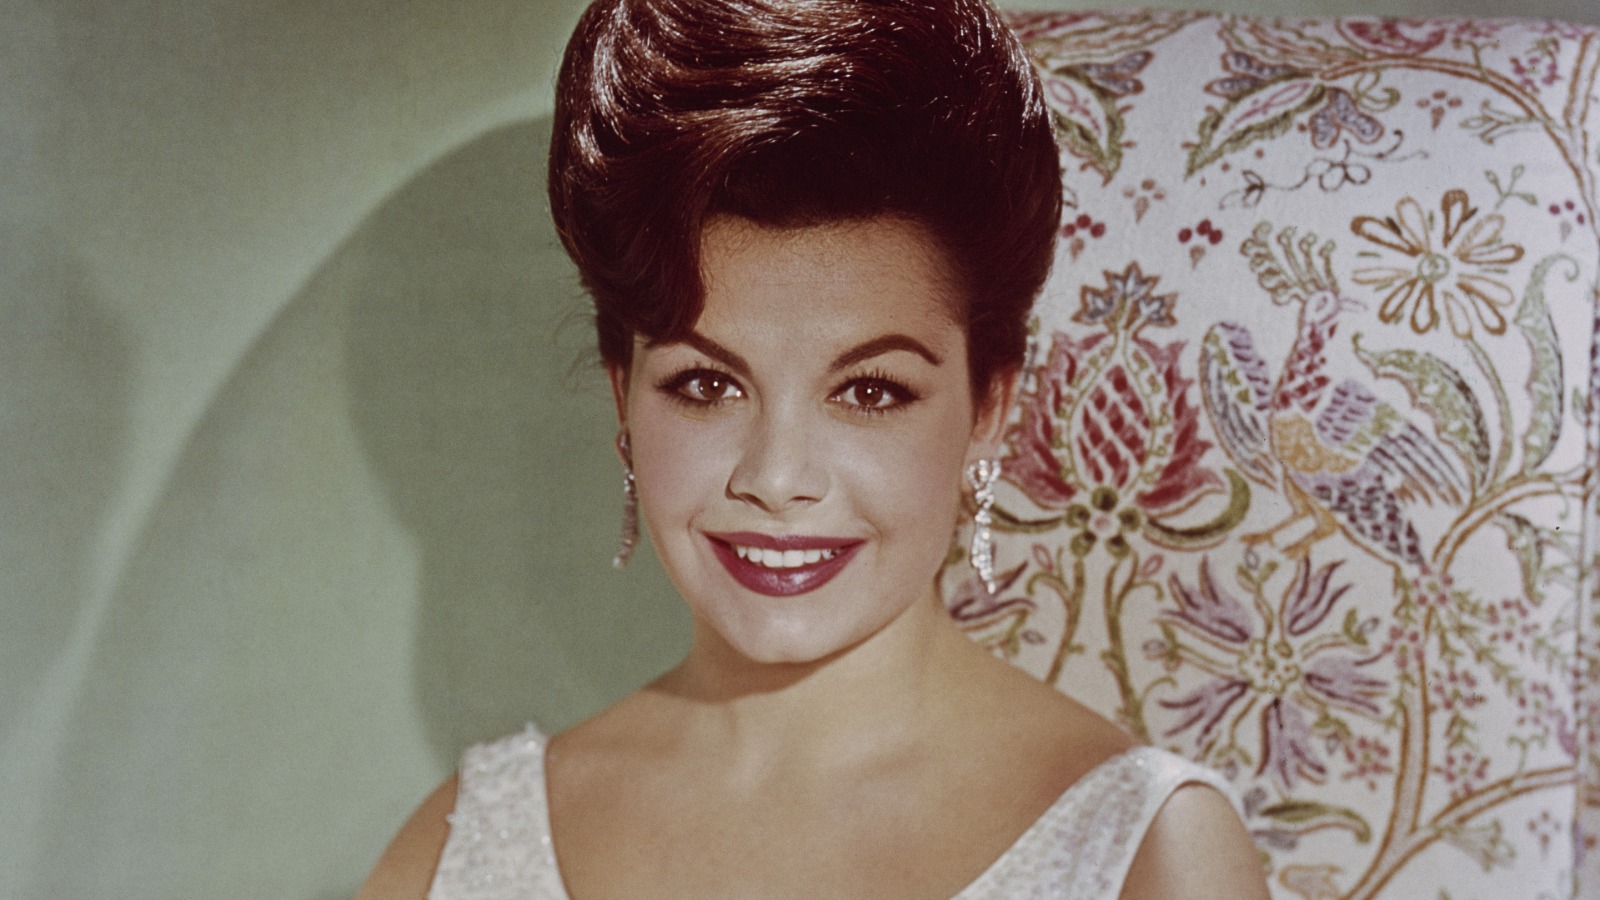 Annette pictures funicello of Ten Knockout